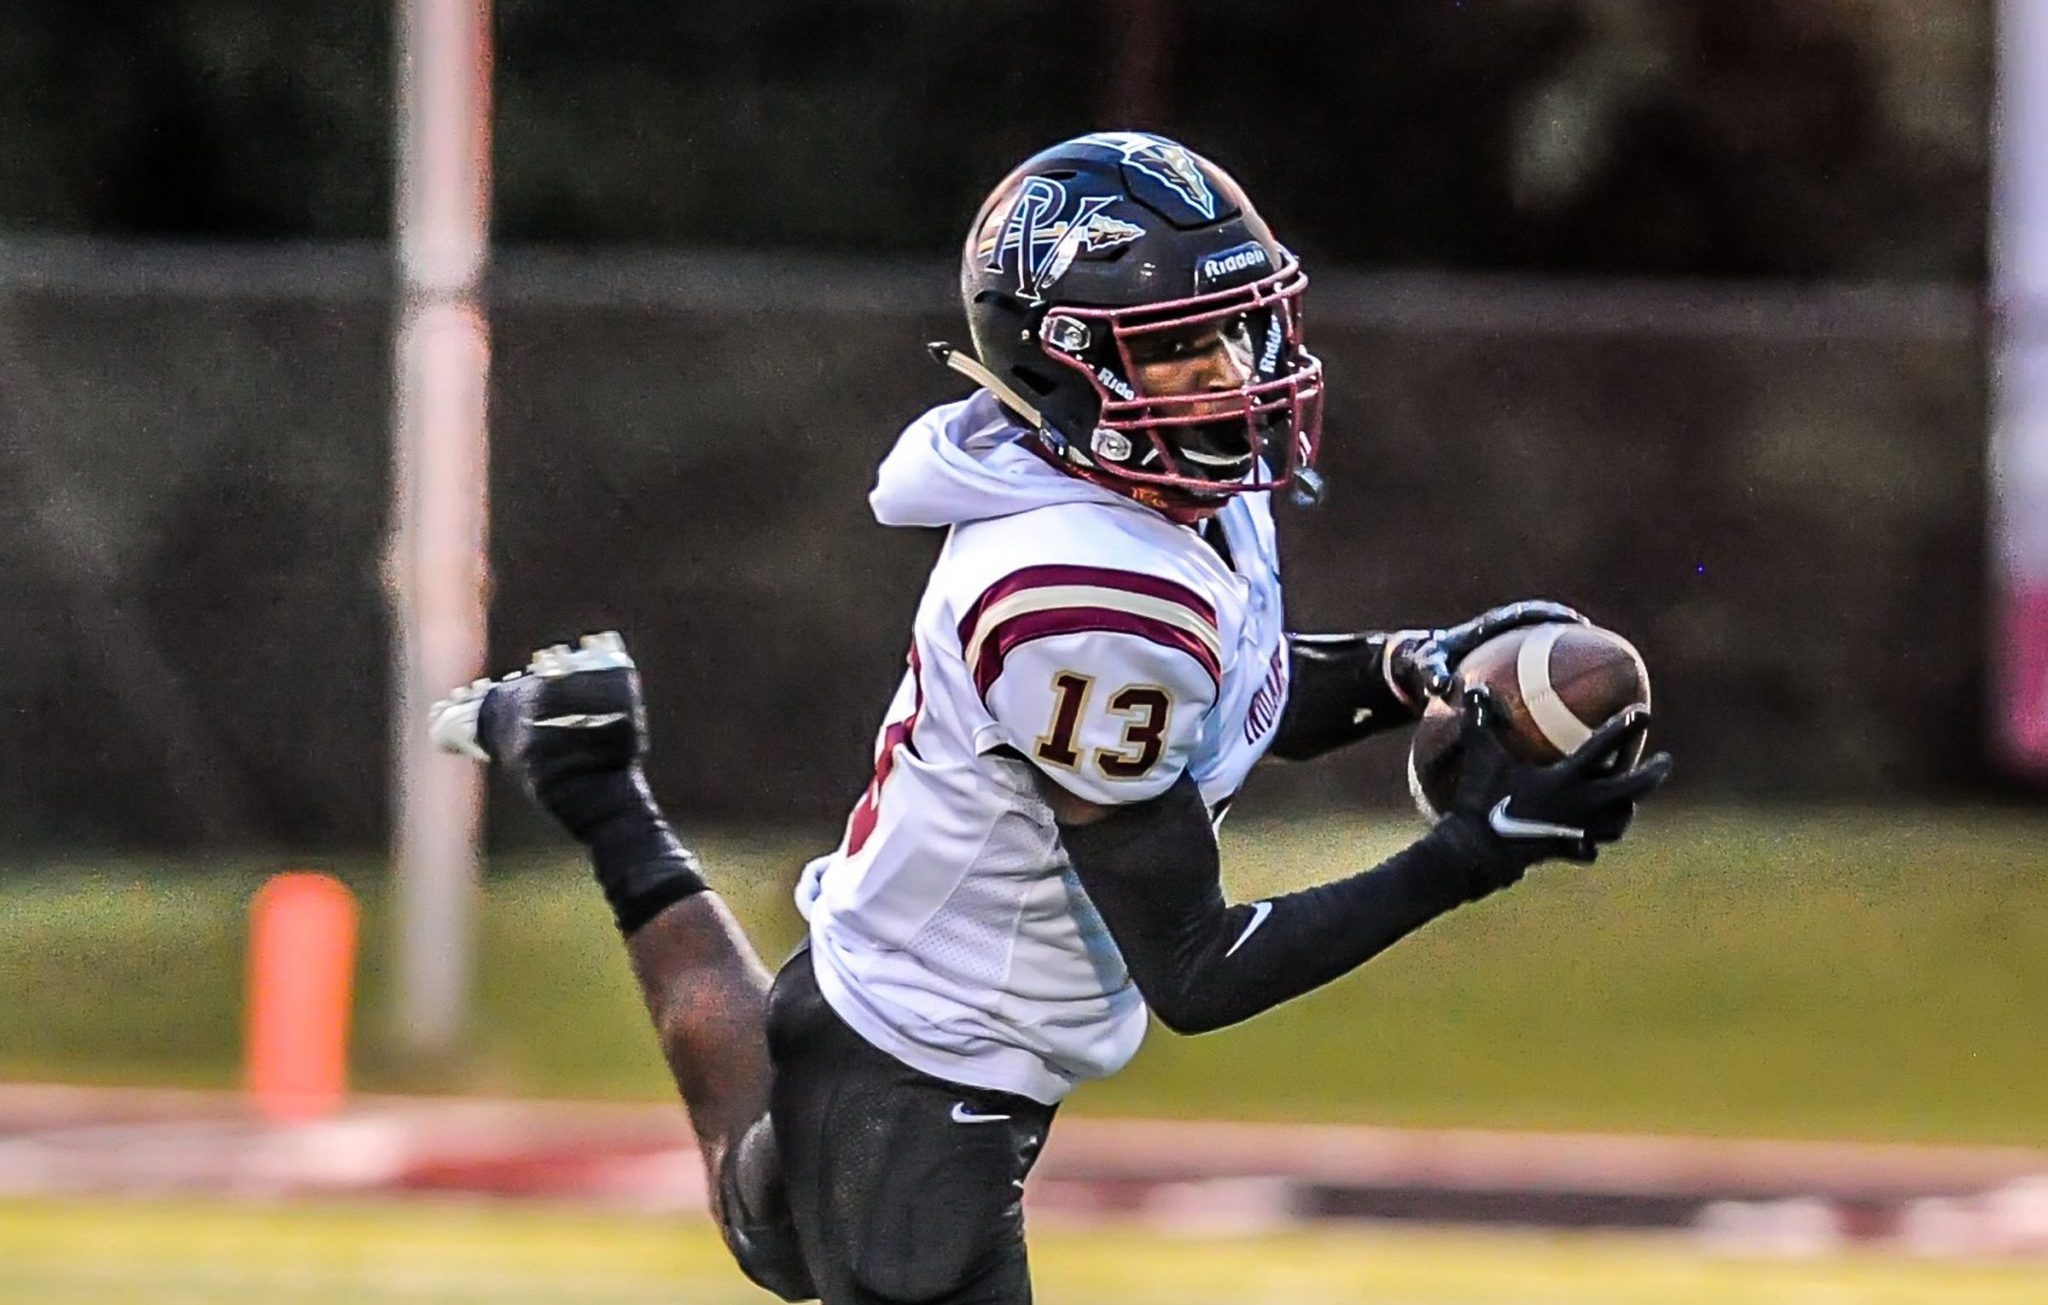 Pyron finds his form, as Pinson Valley rolls at home